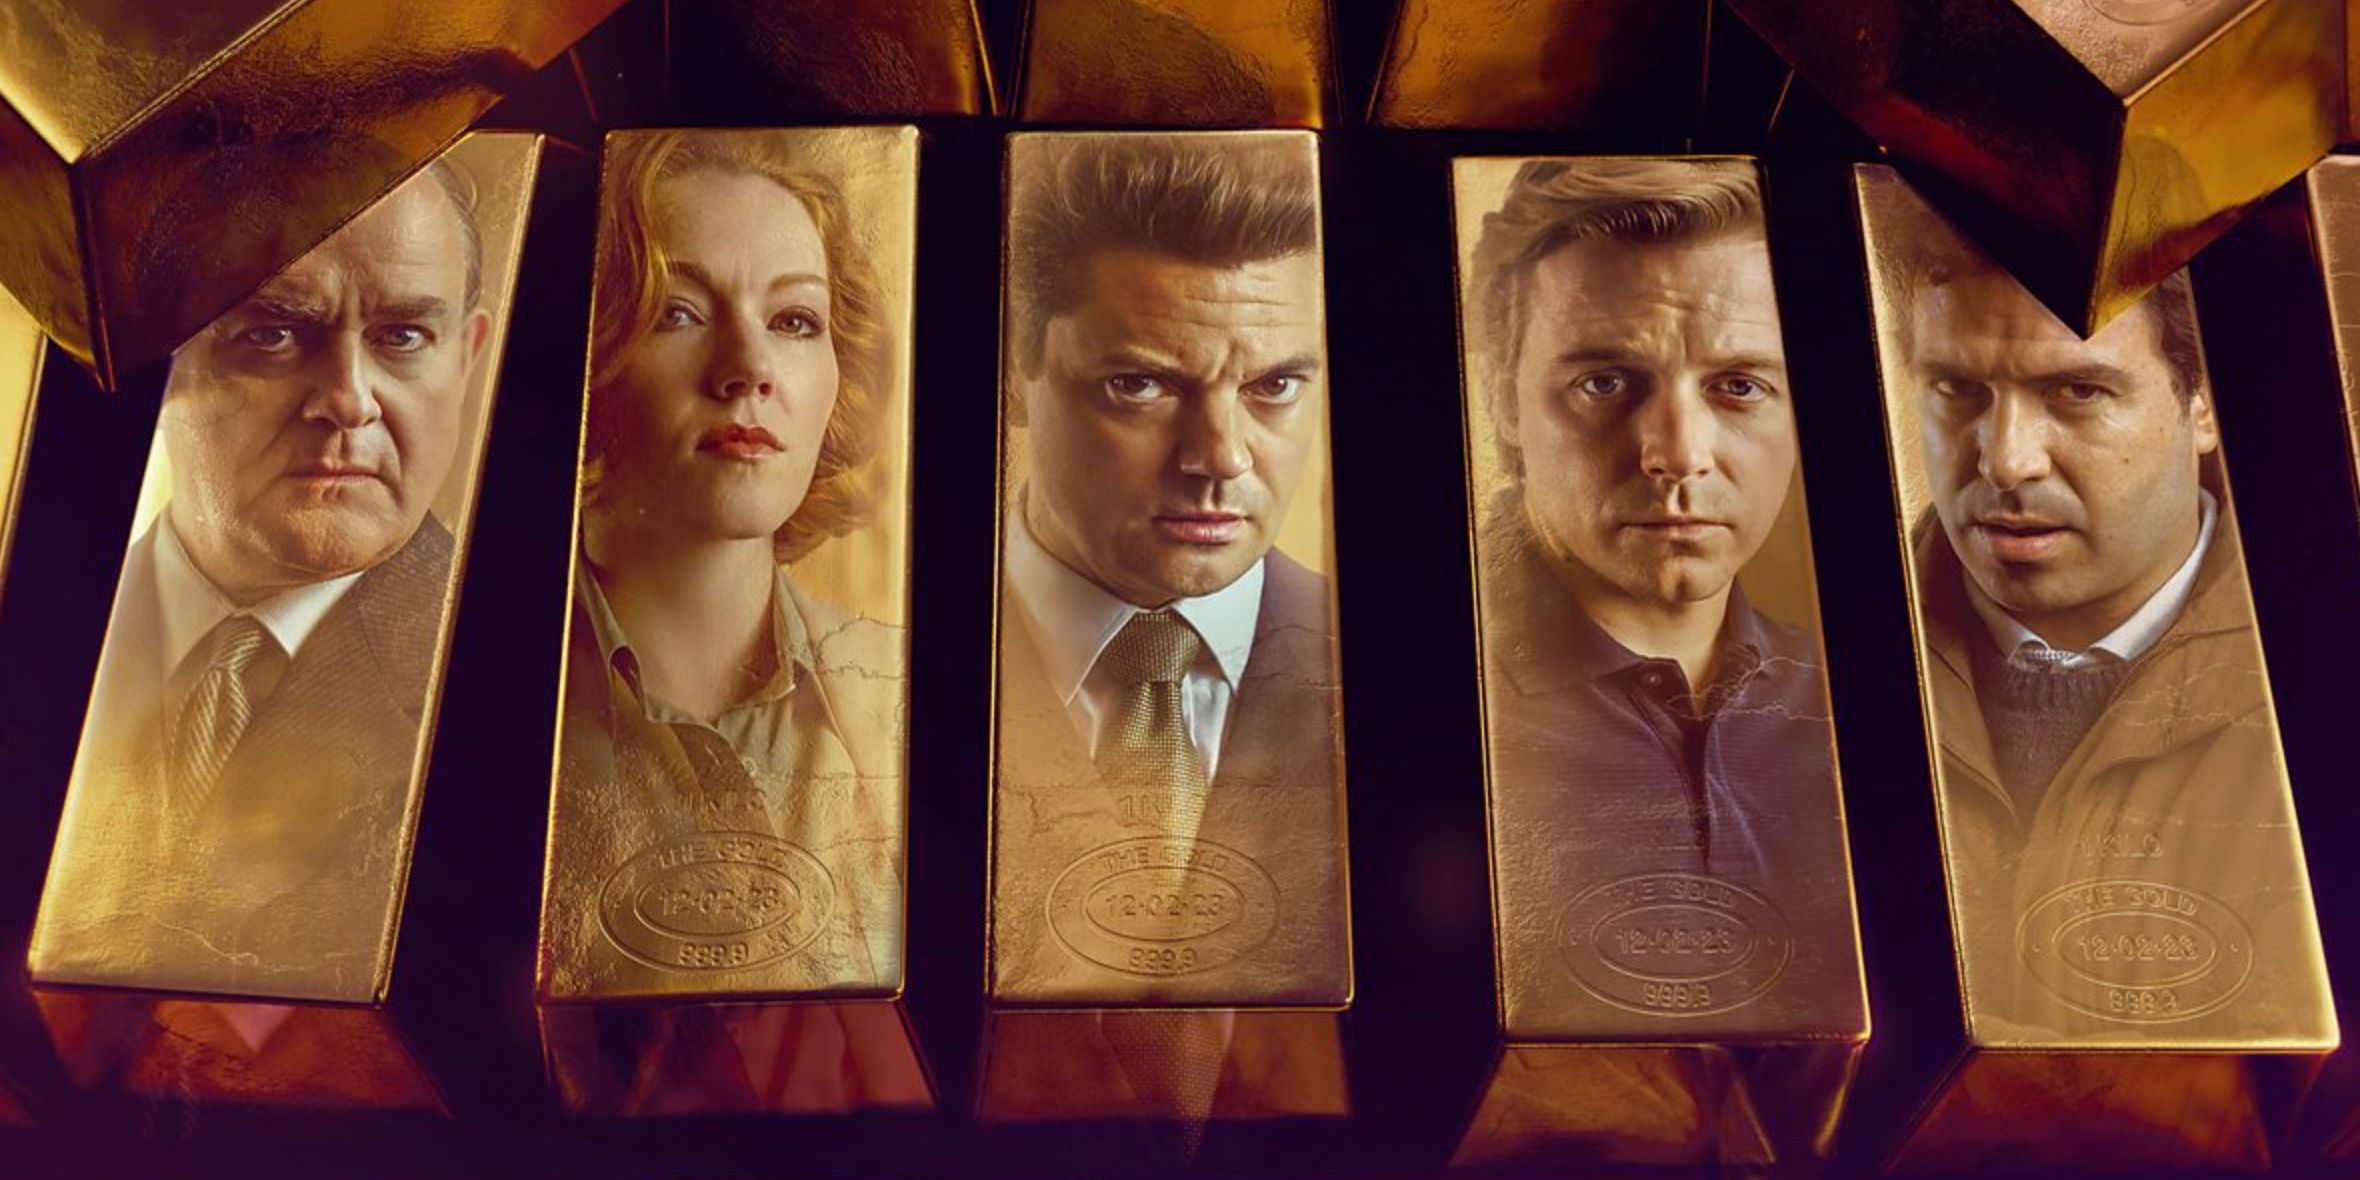 The faces of the cast of the BBC series Gold appear on gold bars